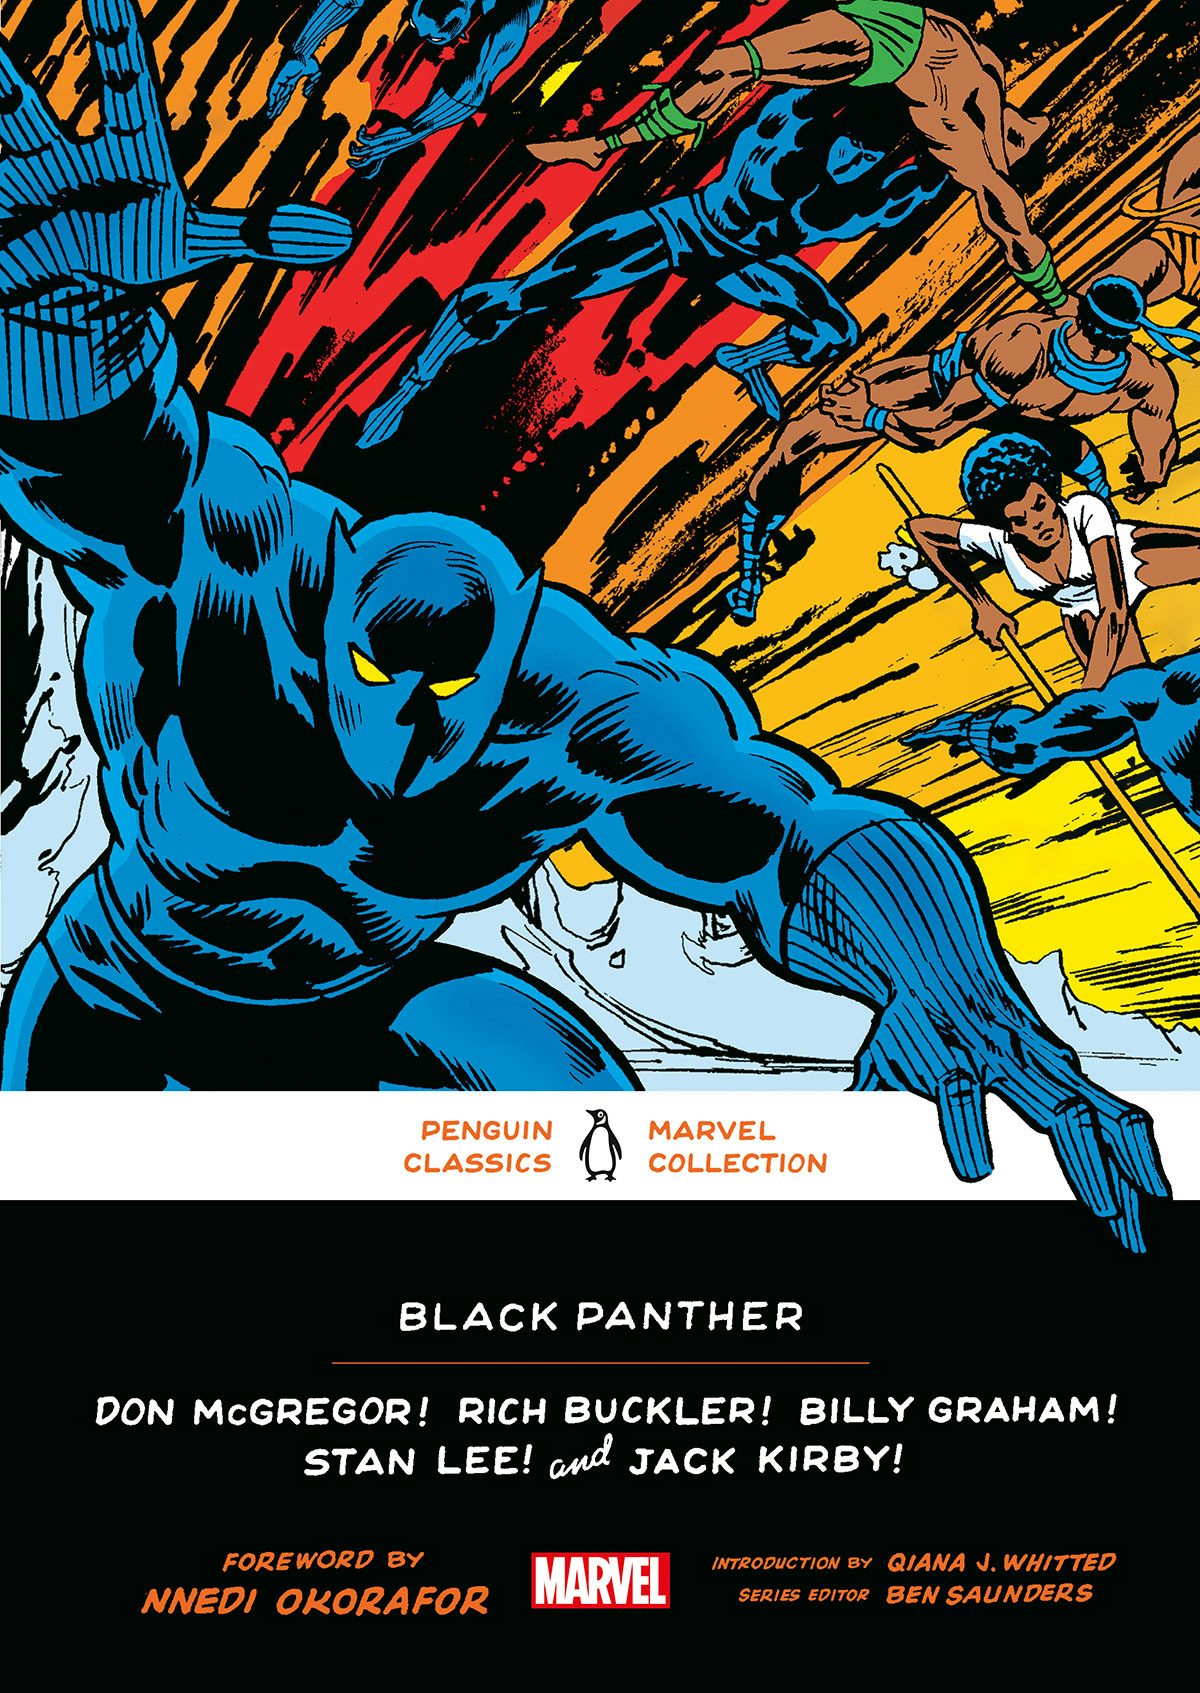 Penguin Marvel series cover featuring Black Panther